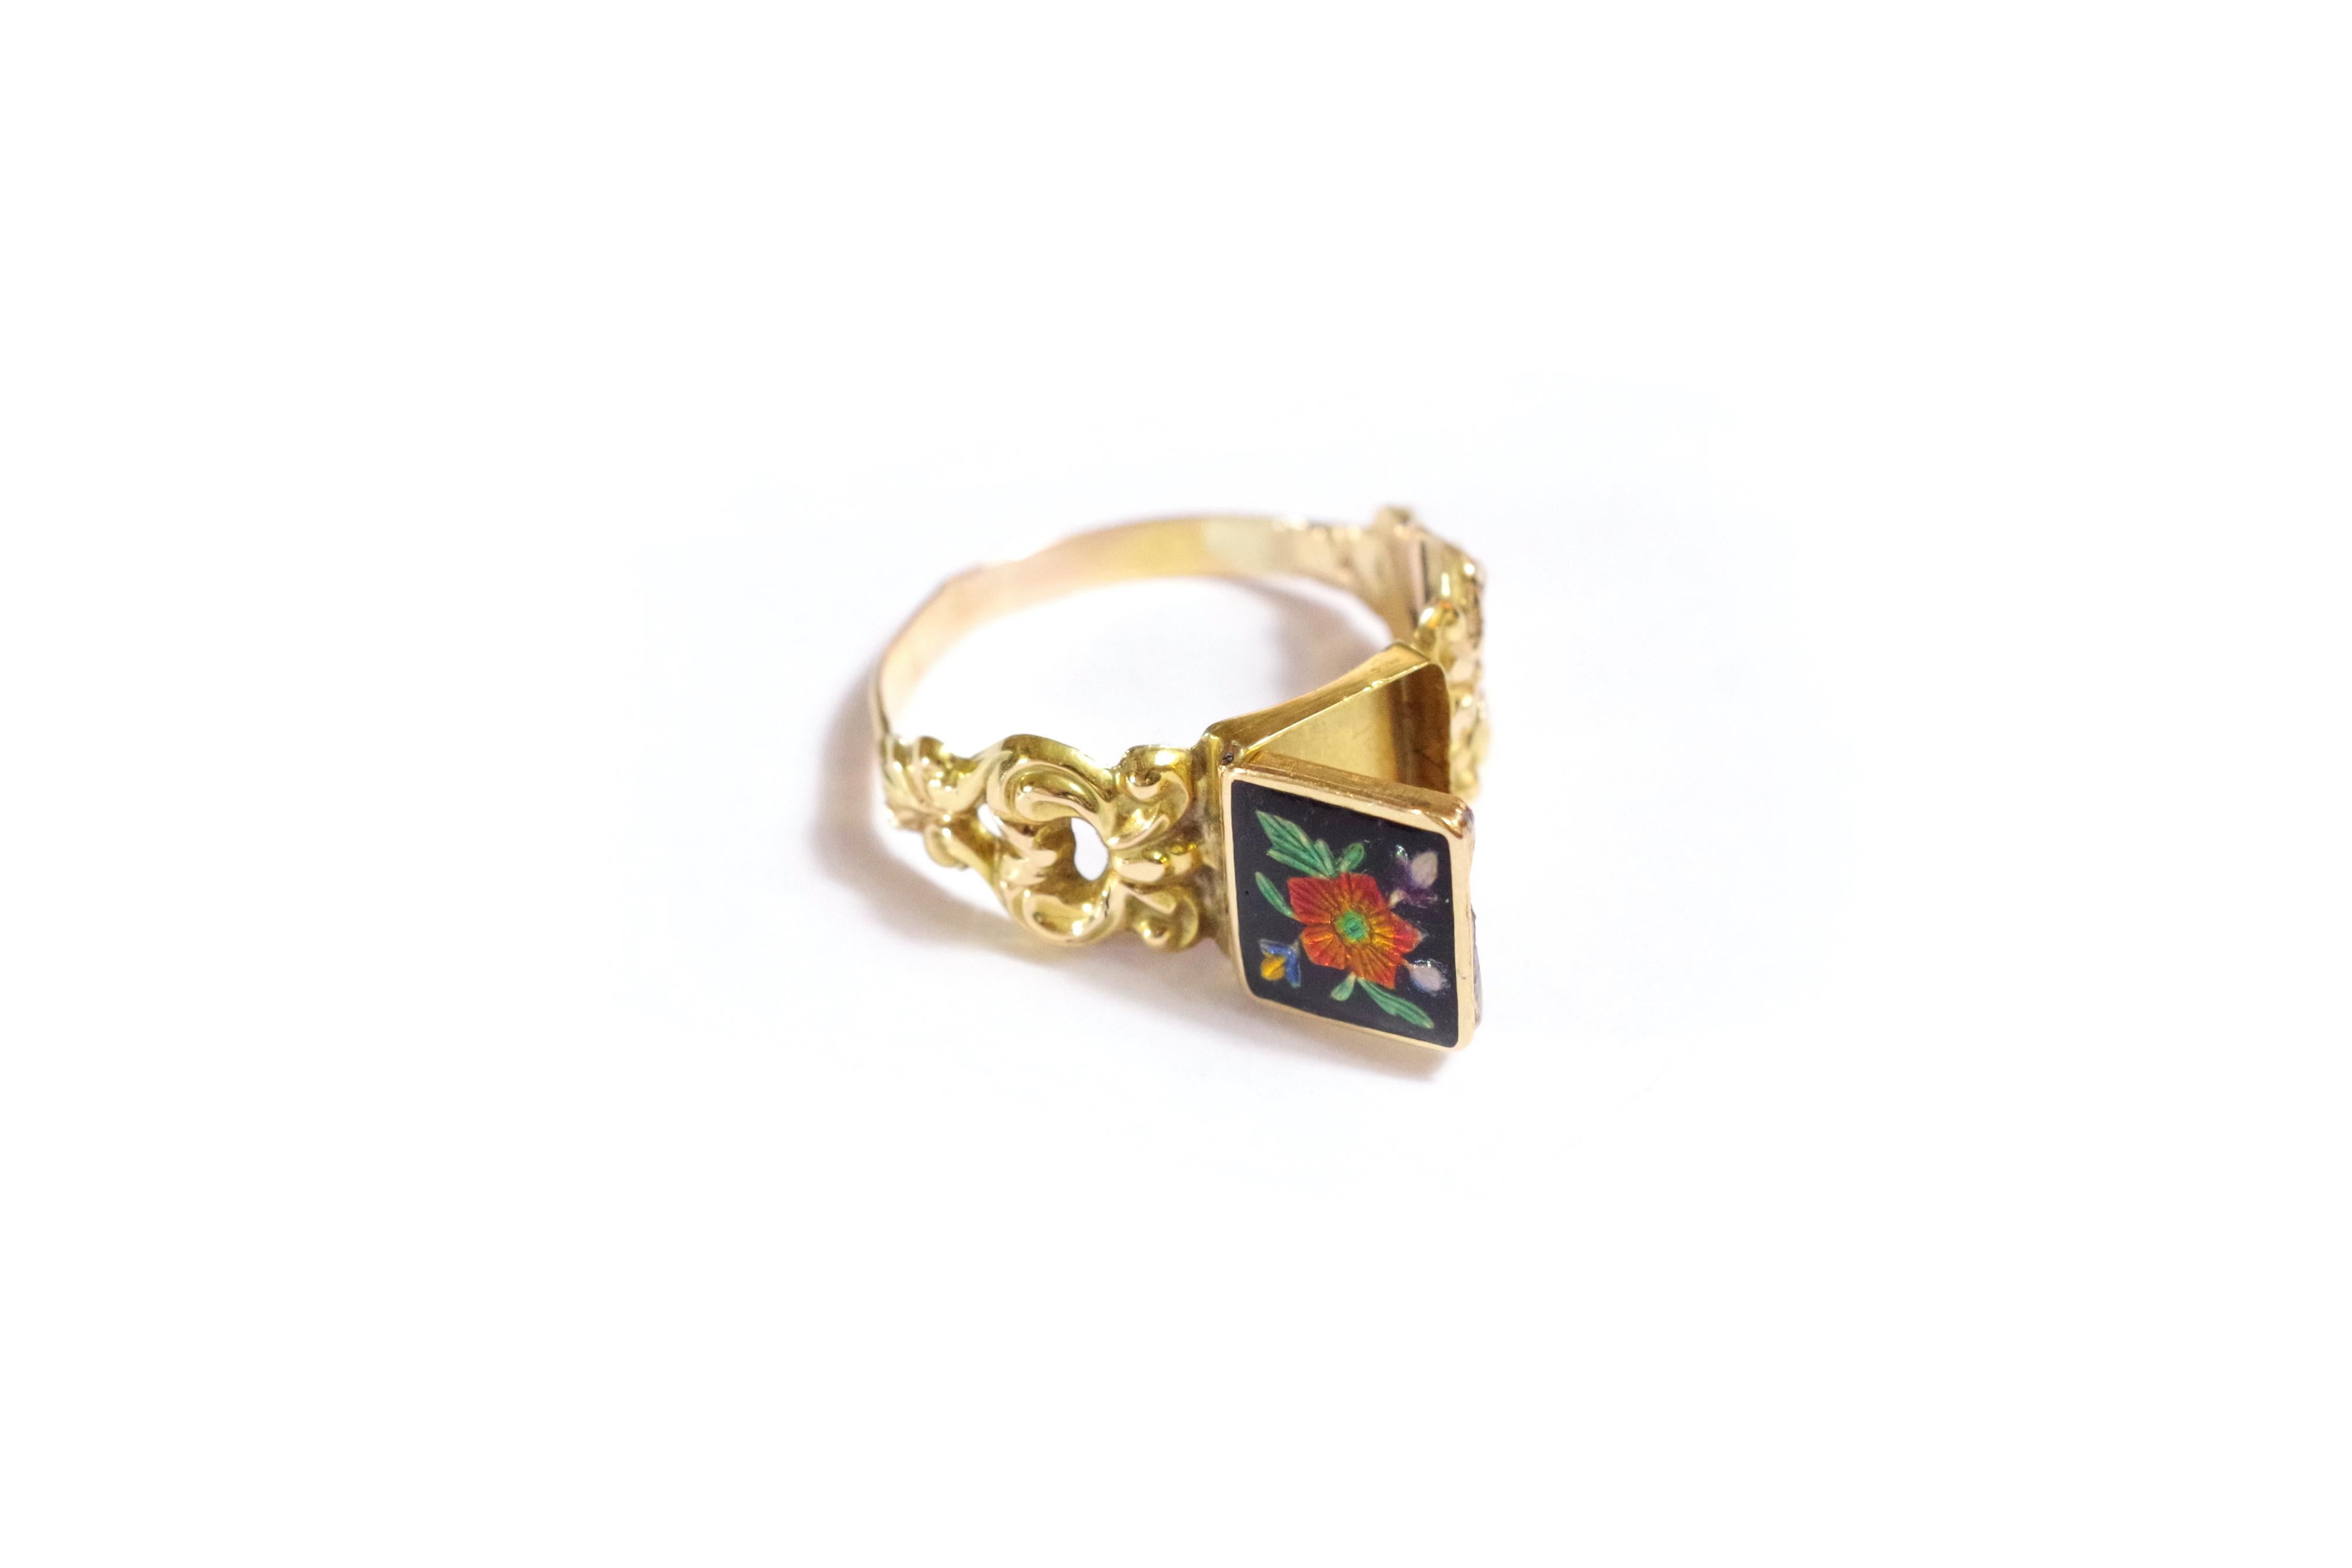 Georgian enamel poison ring in 18 karat yellow gold. Rare ring composed of a square bezel with a secret compartment which opens on the top. The top is decorated with a red enamelled flower on a black background. The ring is richly decorated with